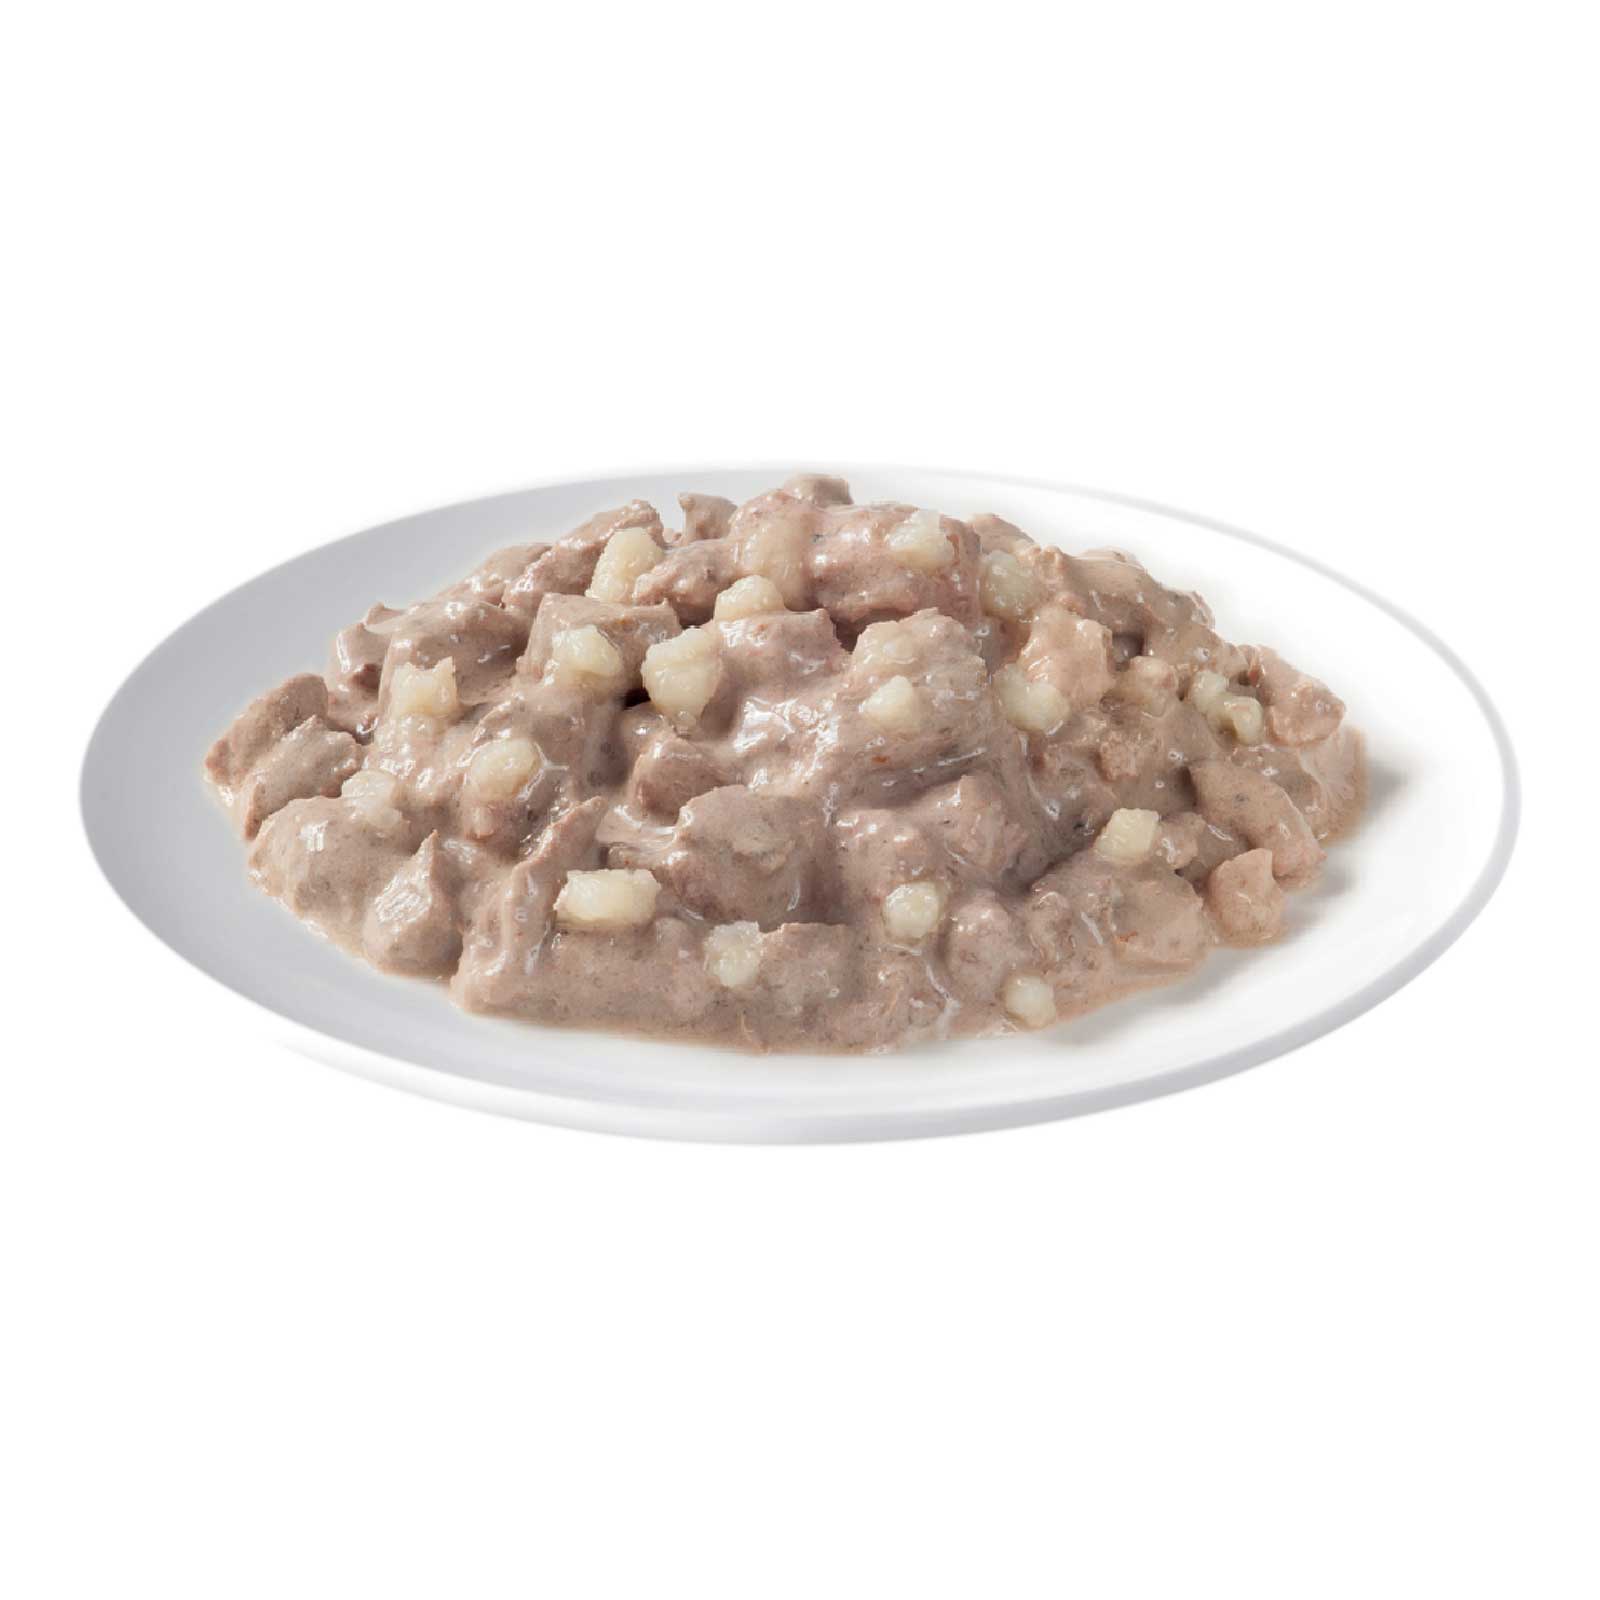 Dine Cat Food Tray Saucy Morsels with Tuna Mornay & Cheese